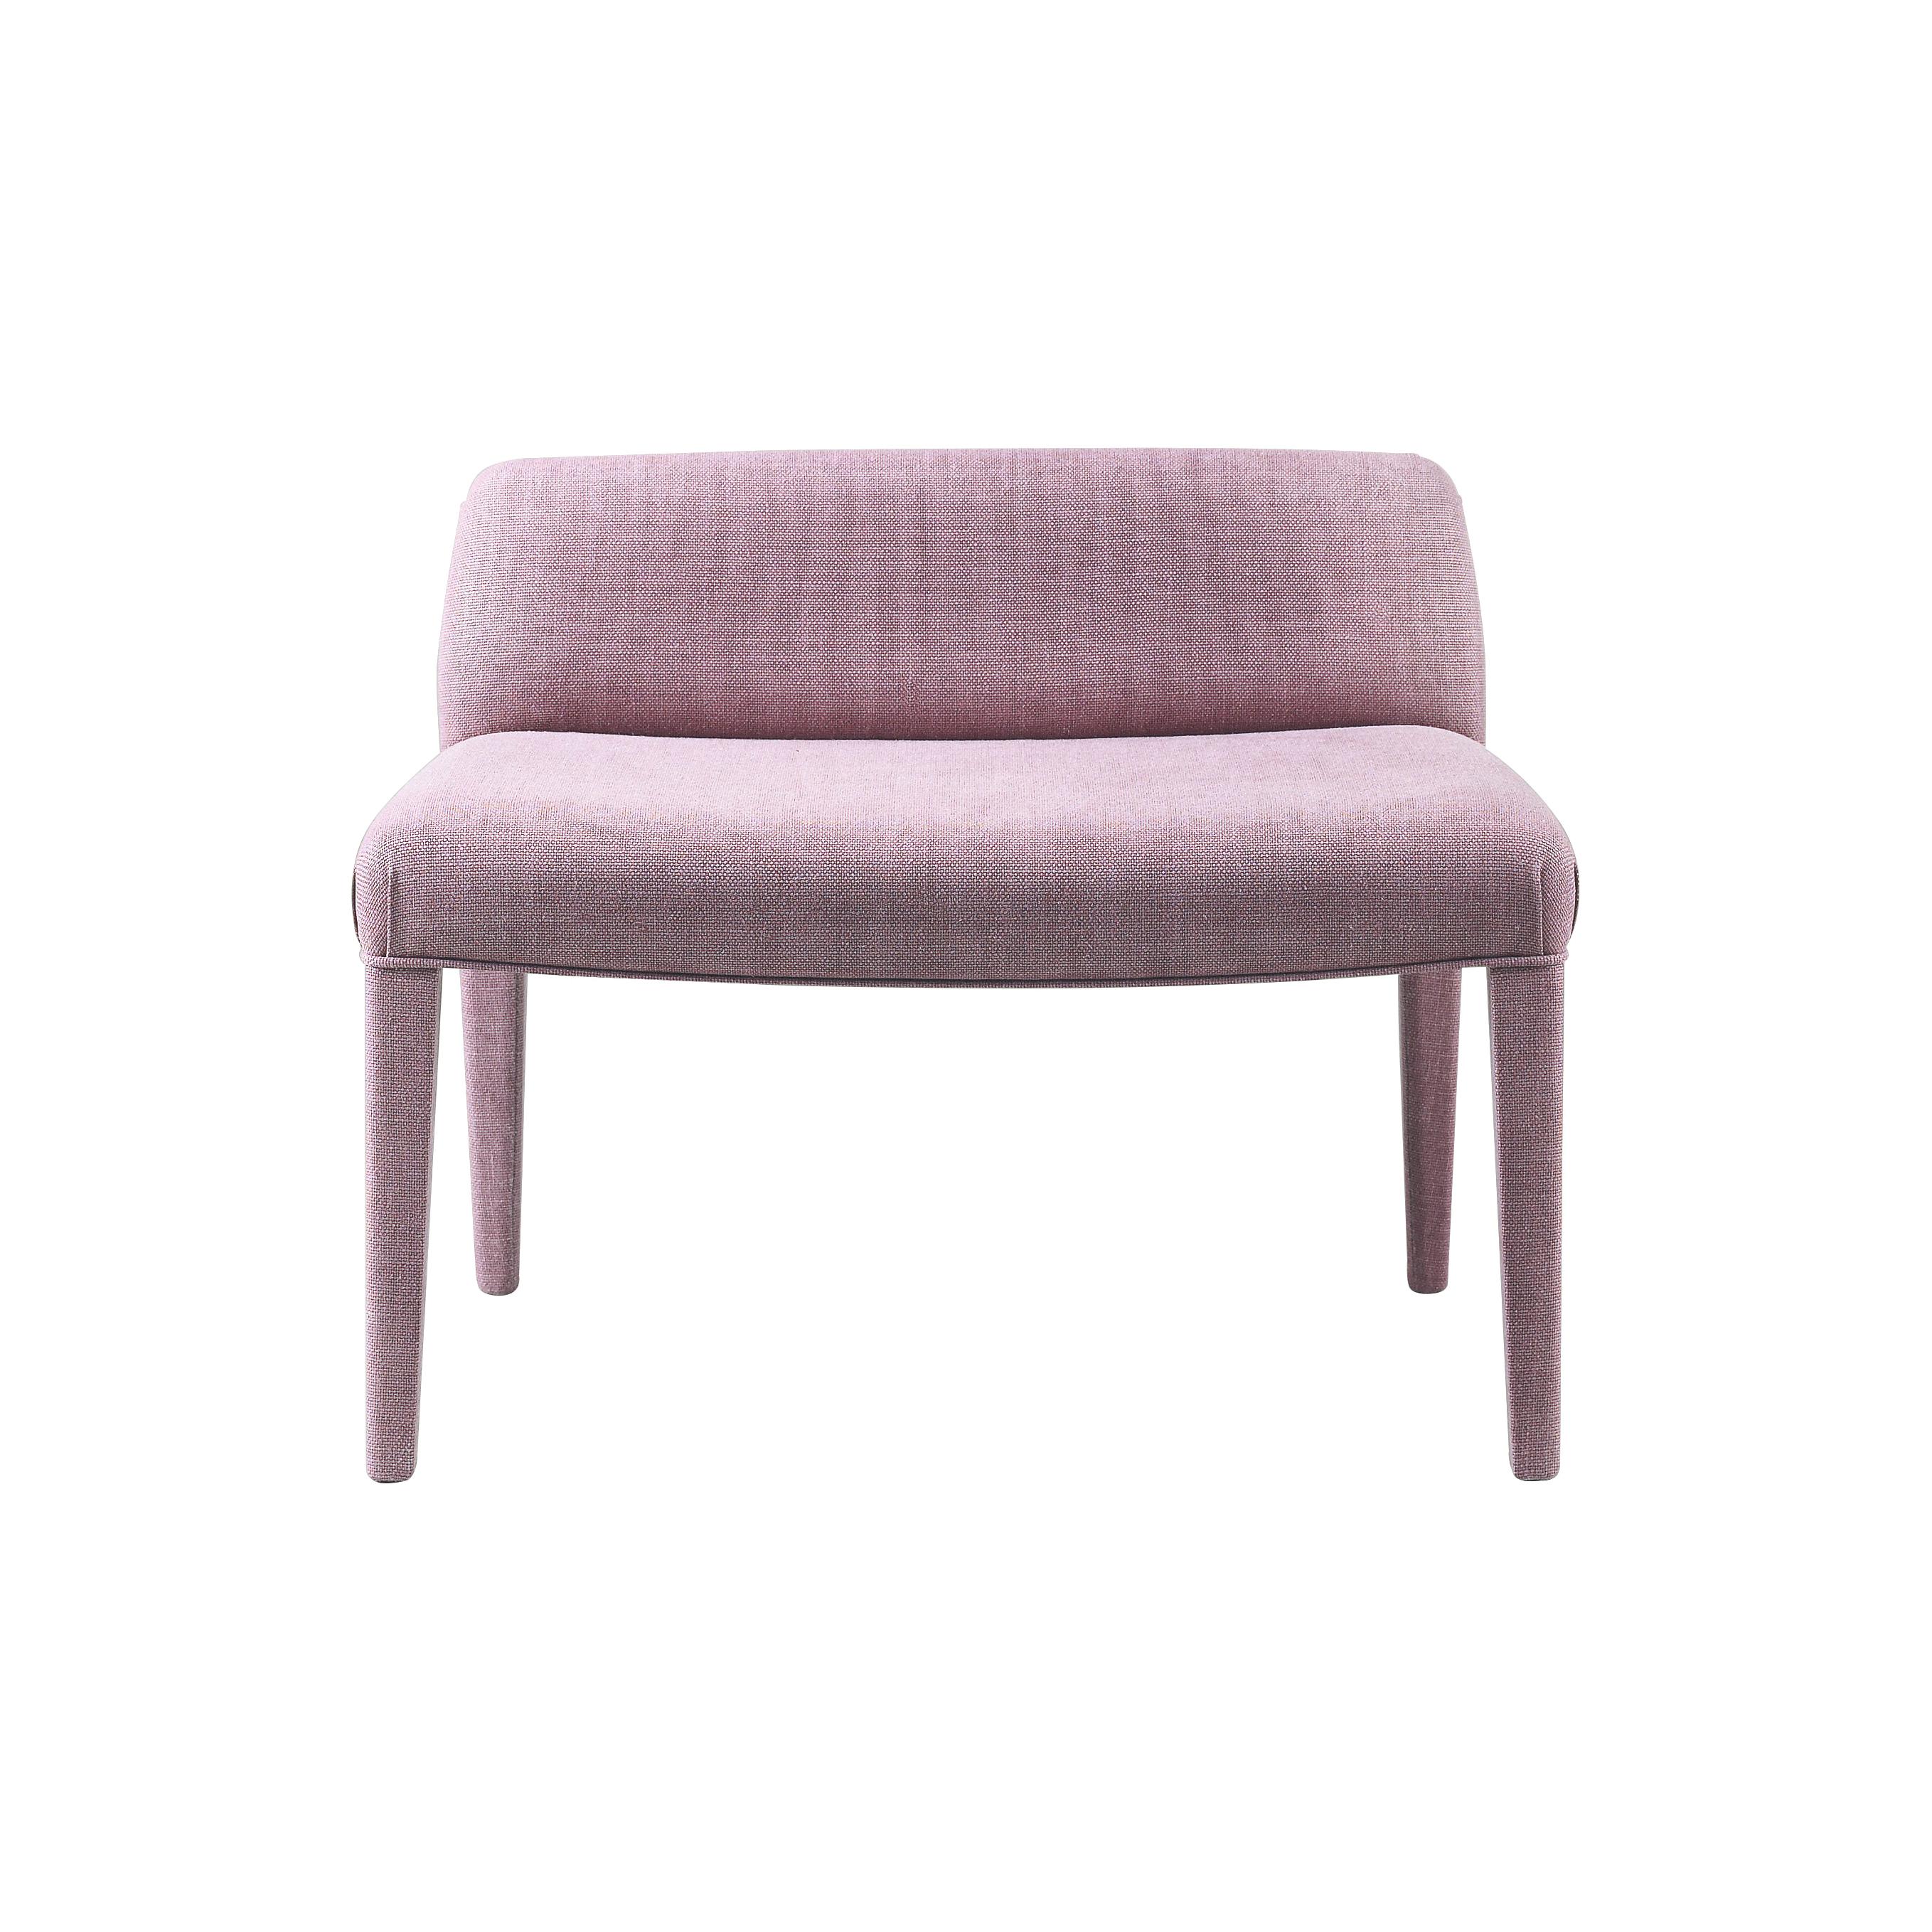 For Sale: Pink (moulin rouge 9.jpg) Promemoria Isotta Bench in Beechwood and Fabric Covering by Romeo Sozzi